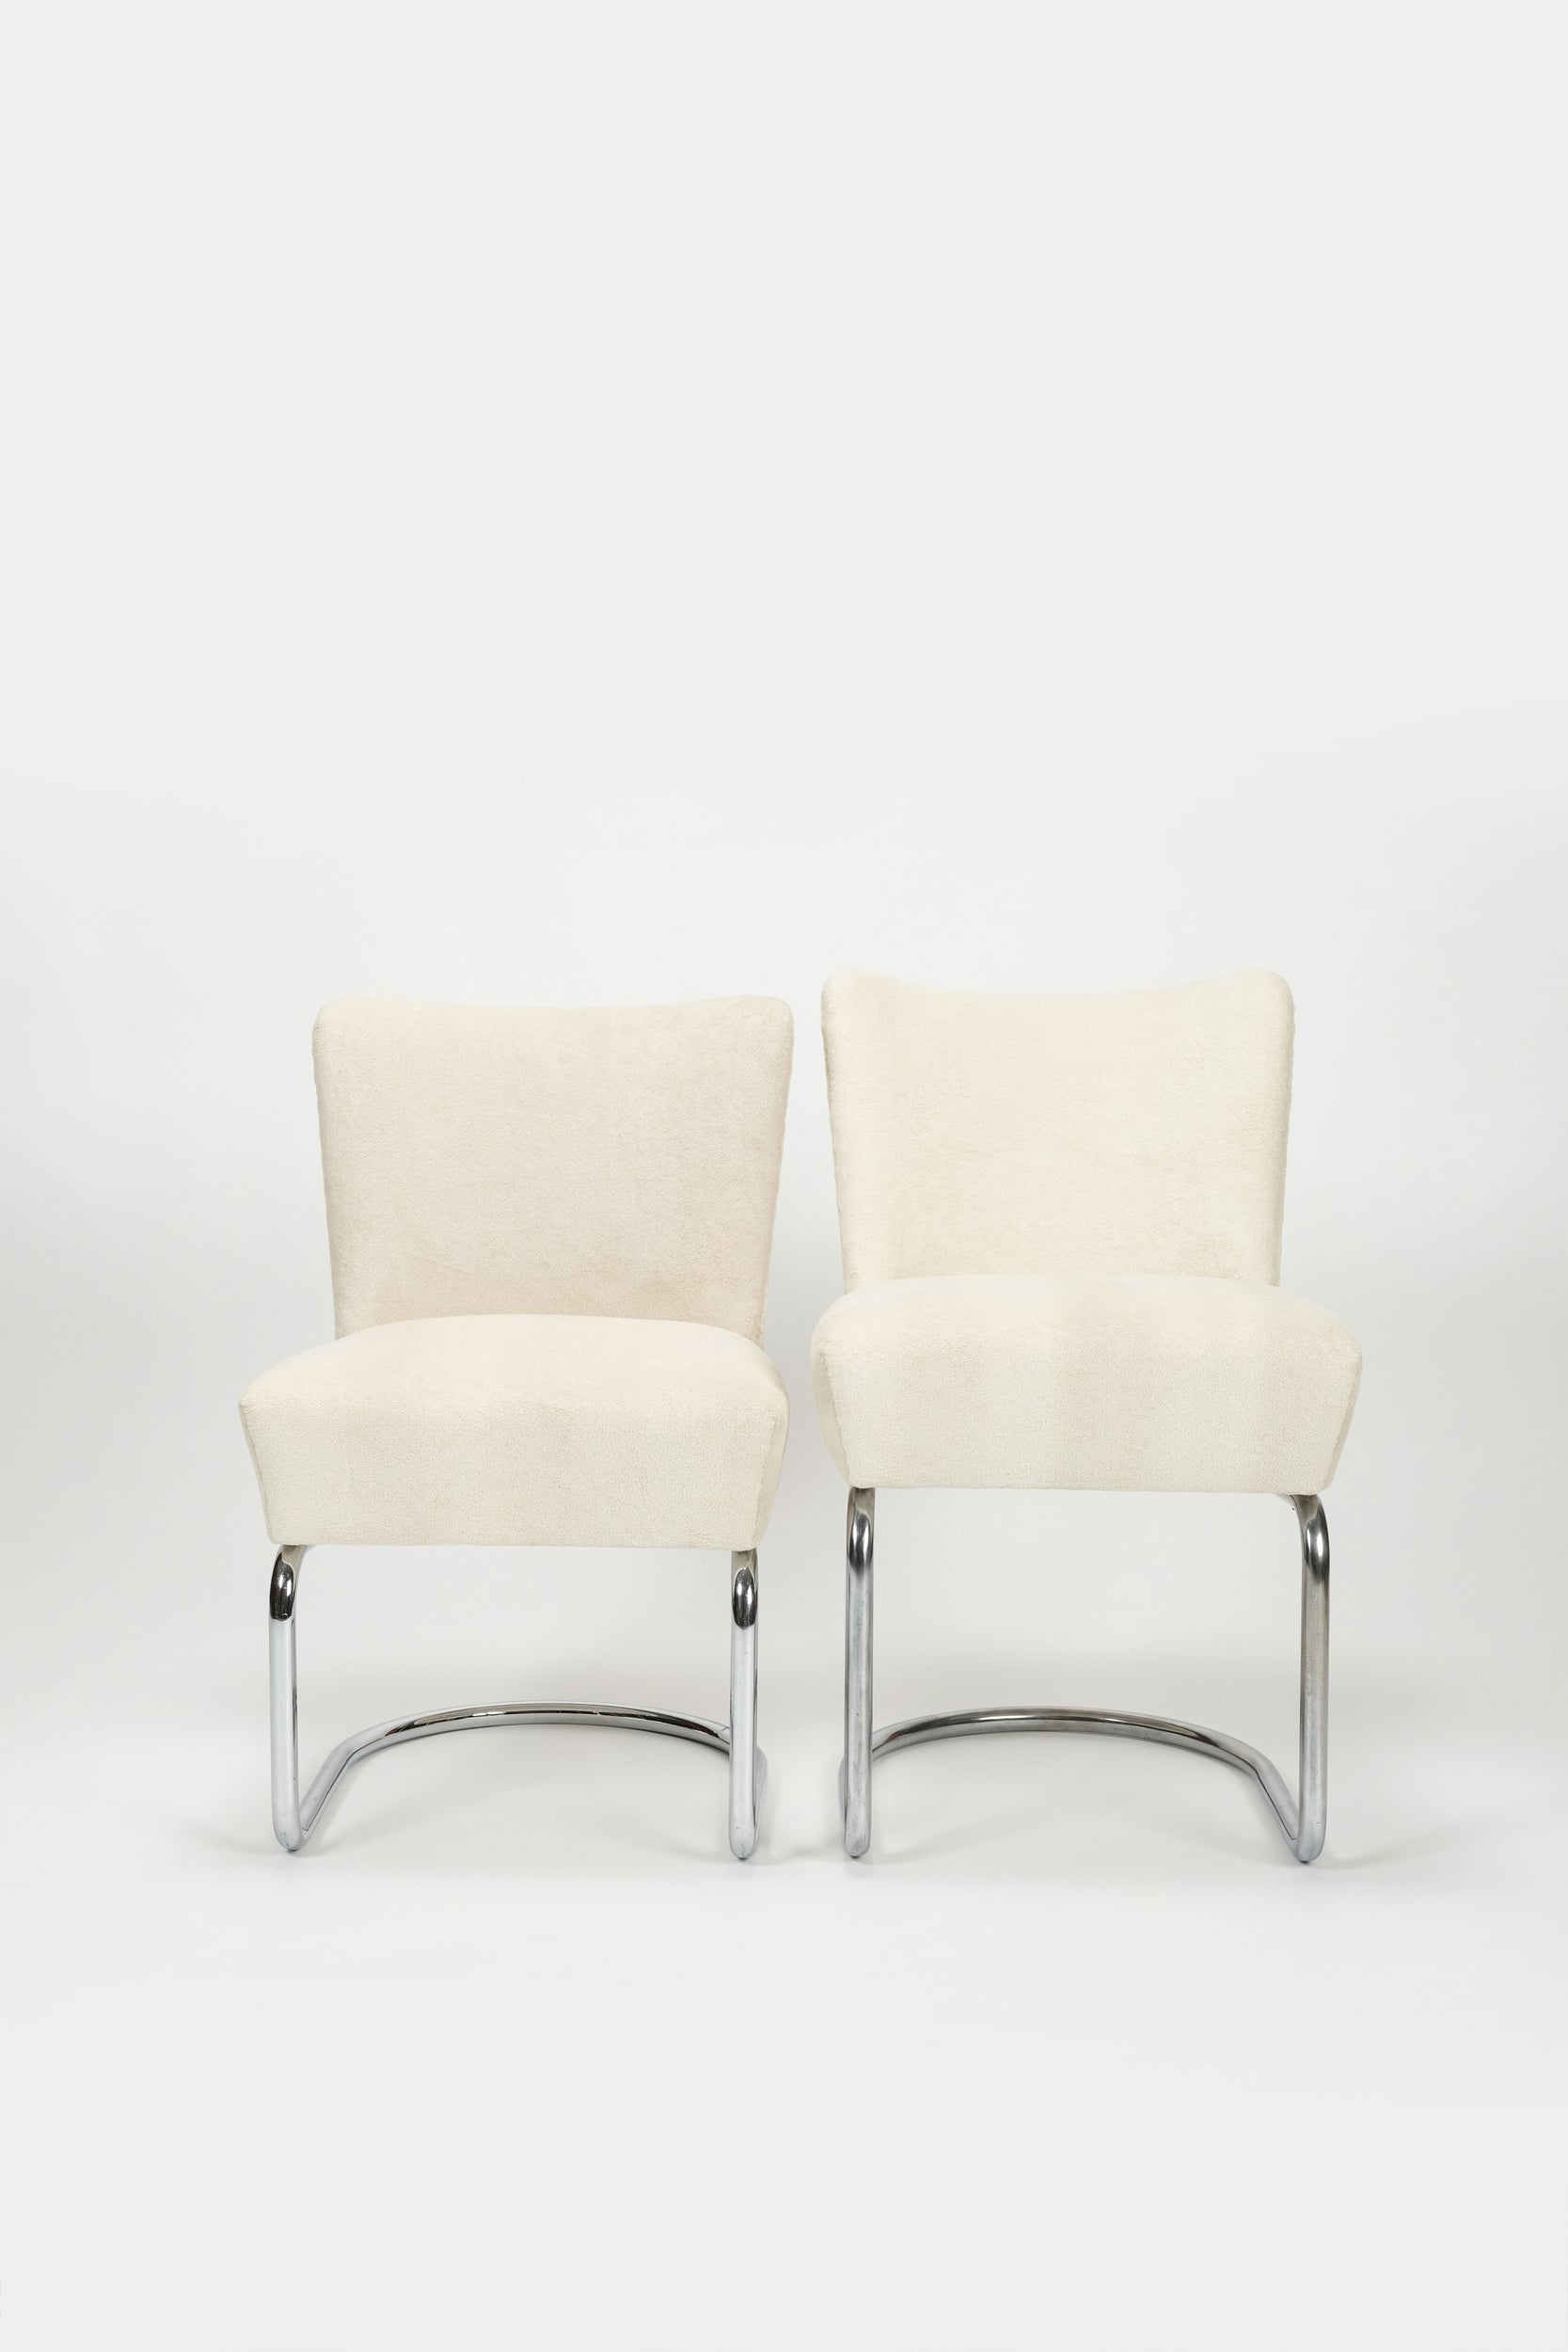 Two cantilever chairs 30s, Germany